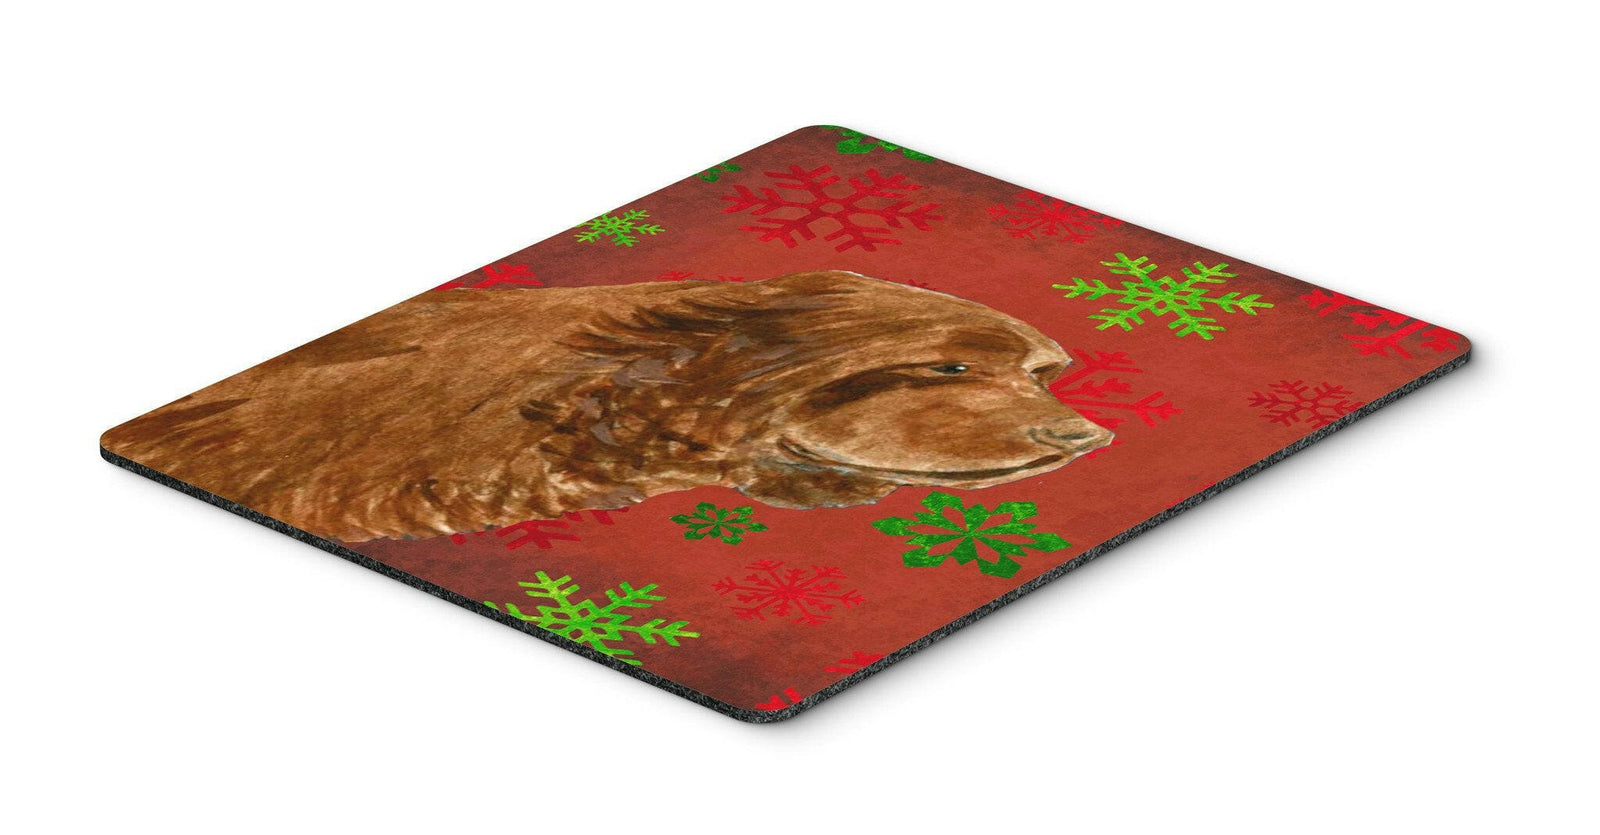 Sussex Spaniel Snowflakes Holiday Christmas Mouse Pad, Hot Pad or Trivet by Caroline's Treasures